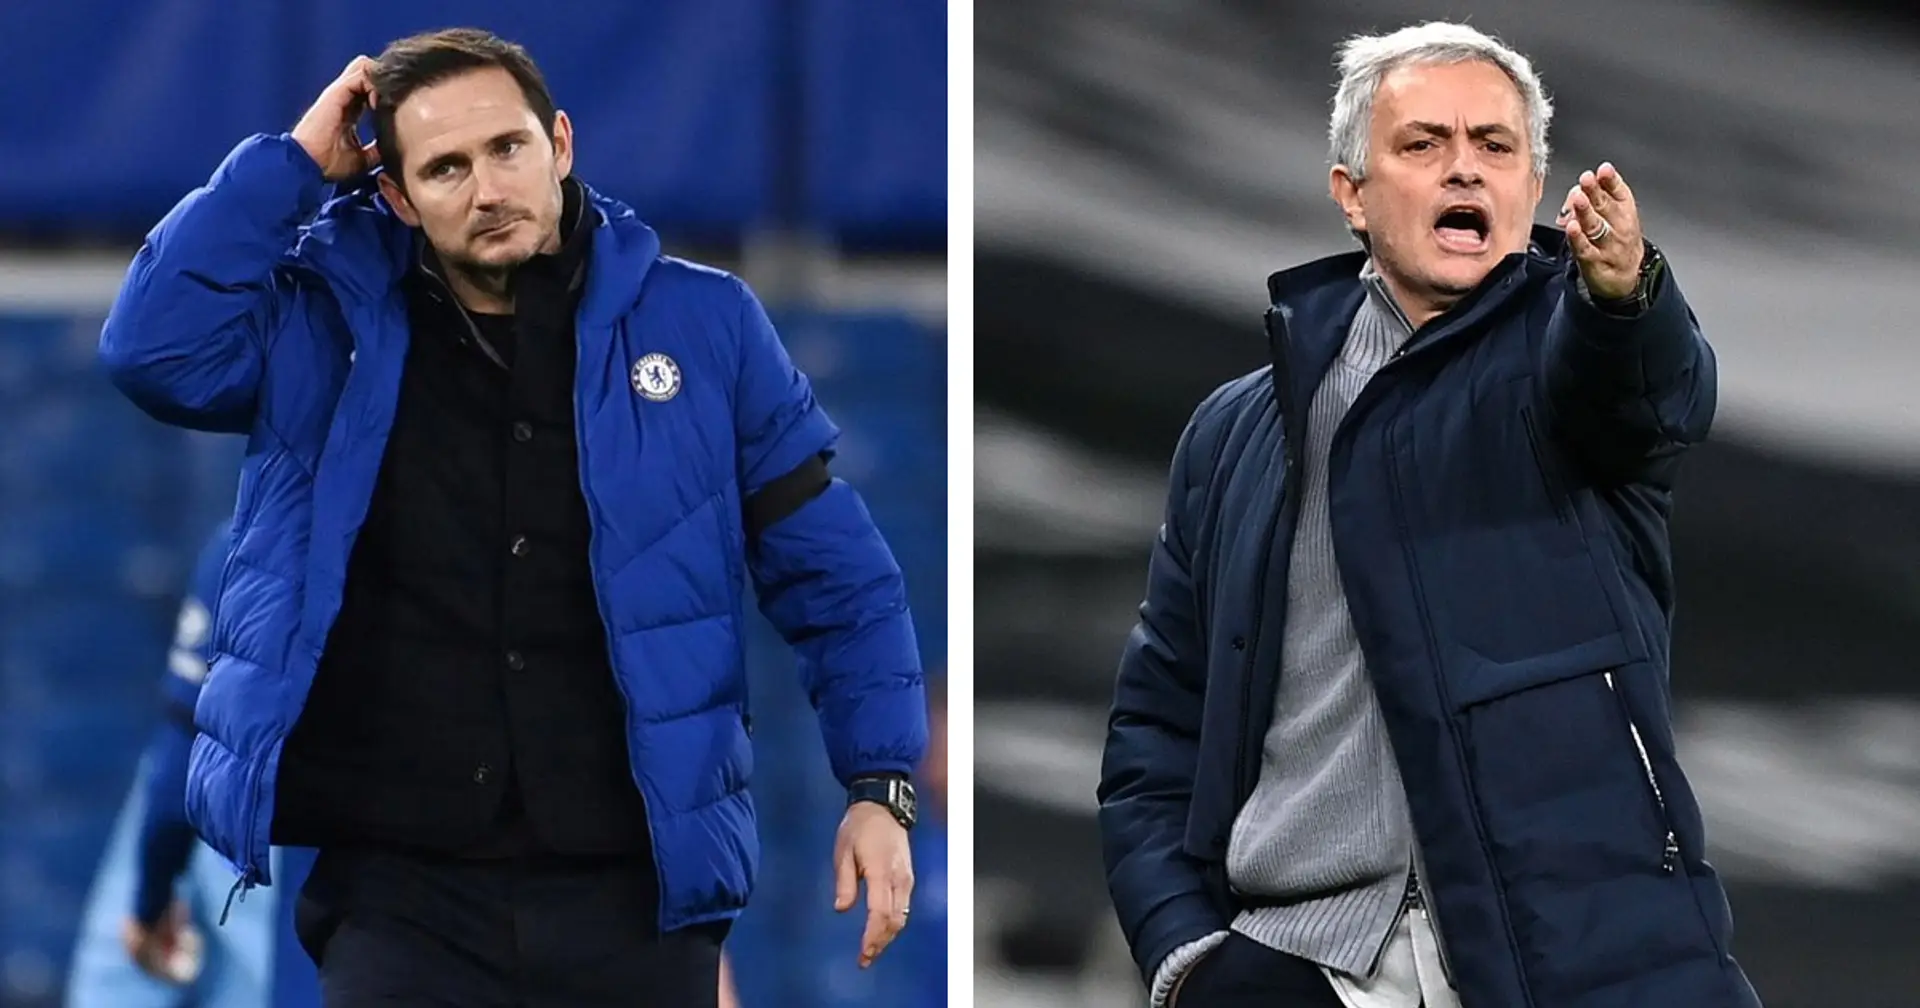 Angry Tottenham fan calls on Daniel Levy to sack Mourinho and replace him with Lampard after Spurs' latest loss